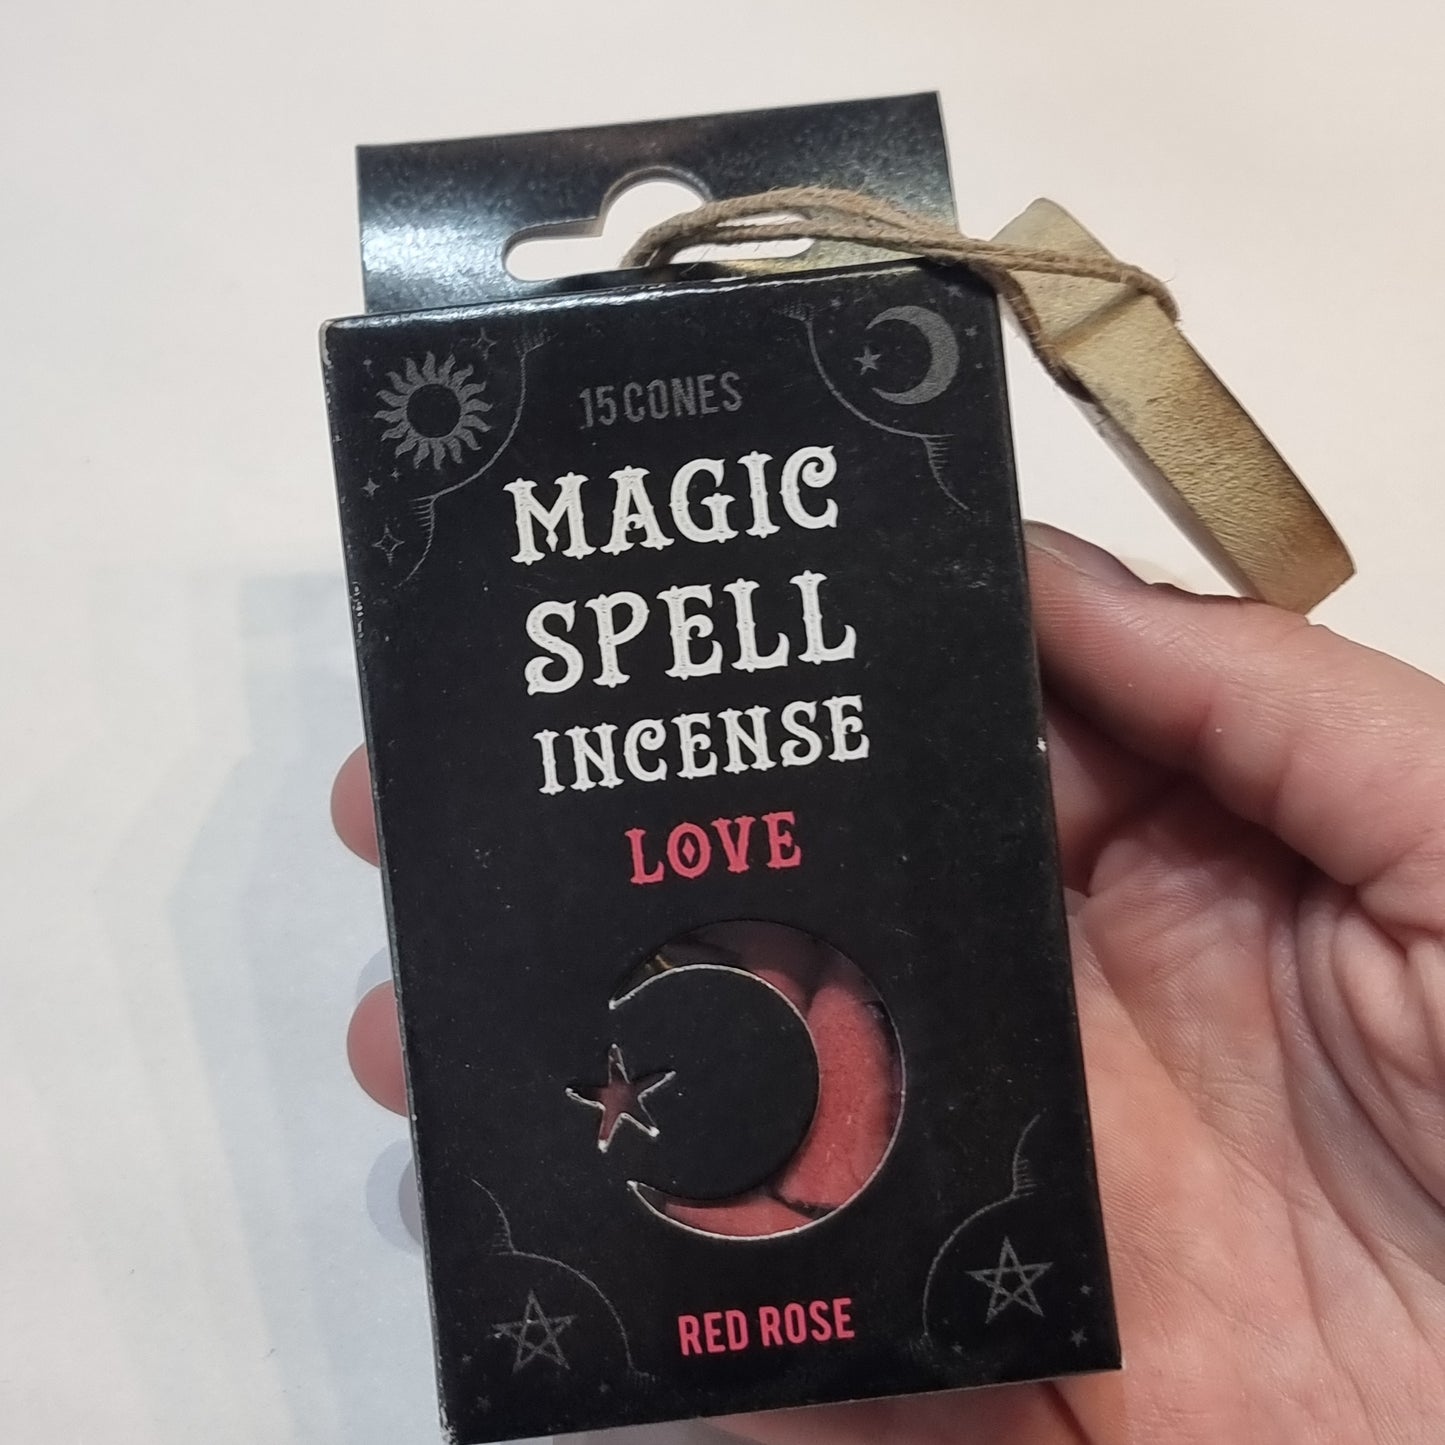 Magic spell incense cones - red rose - Rivendell Shop